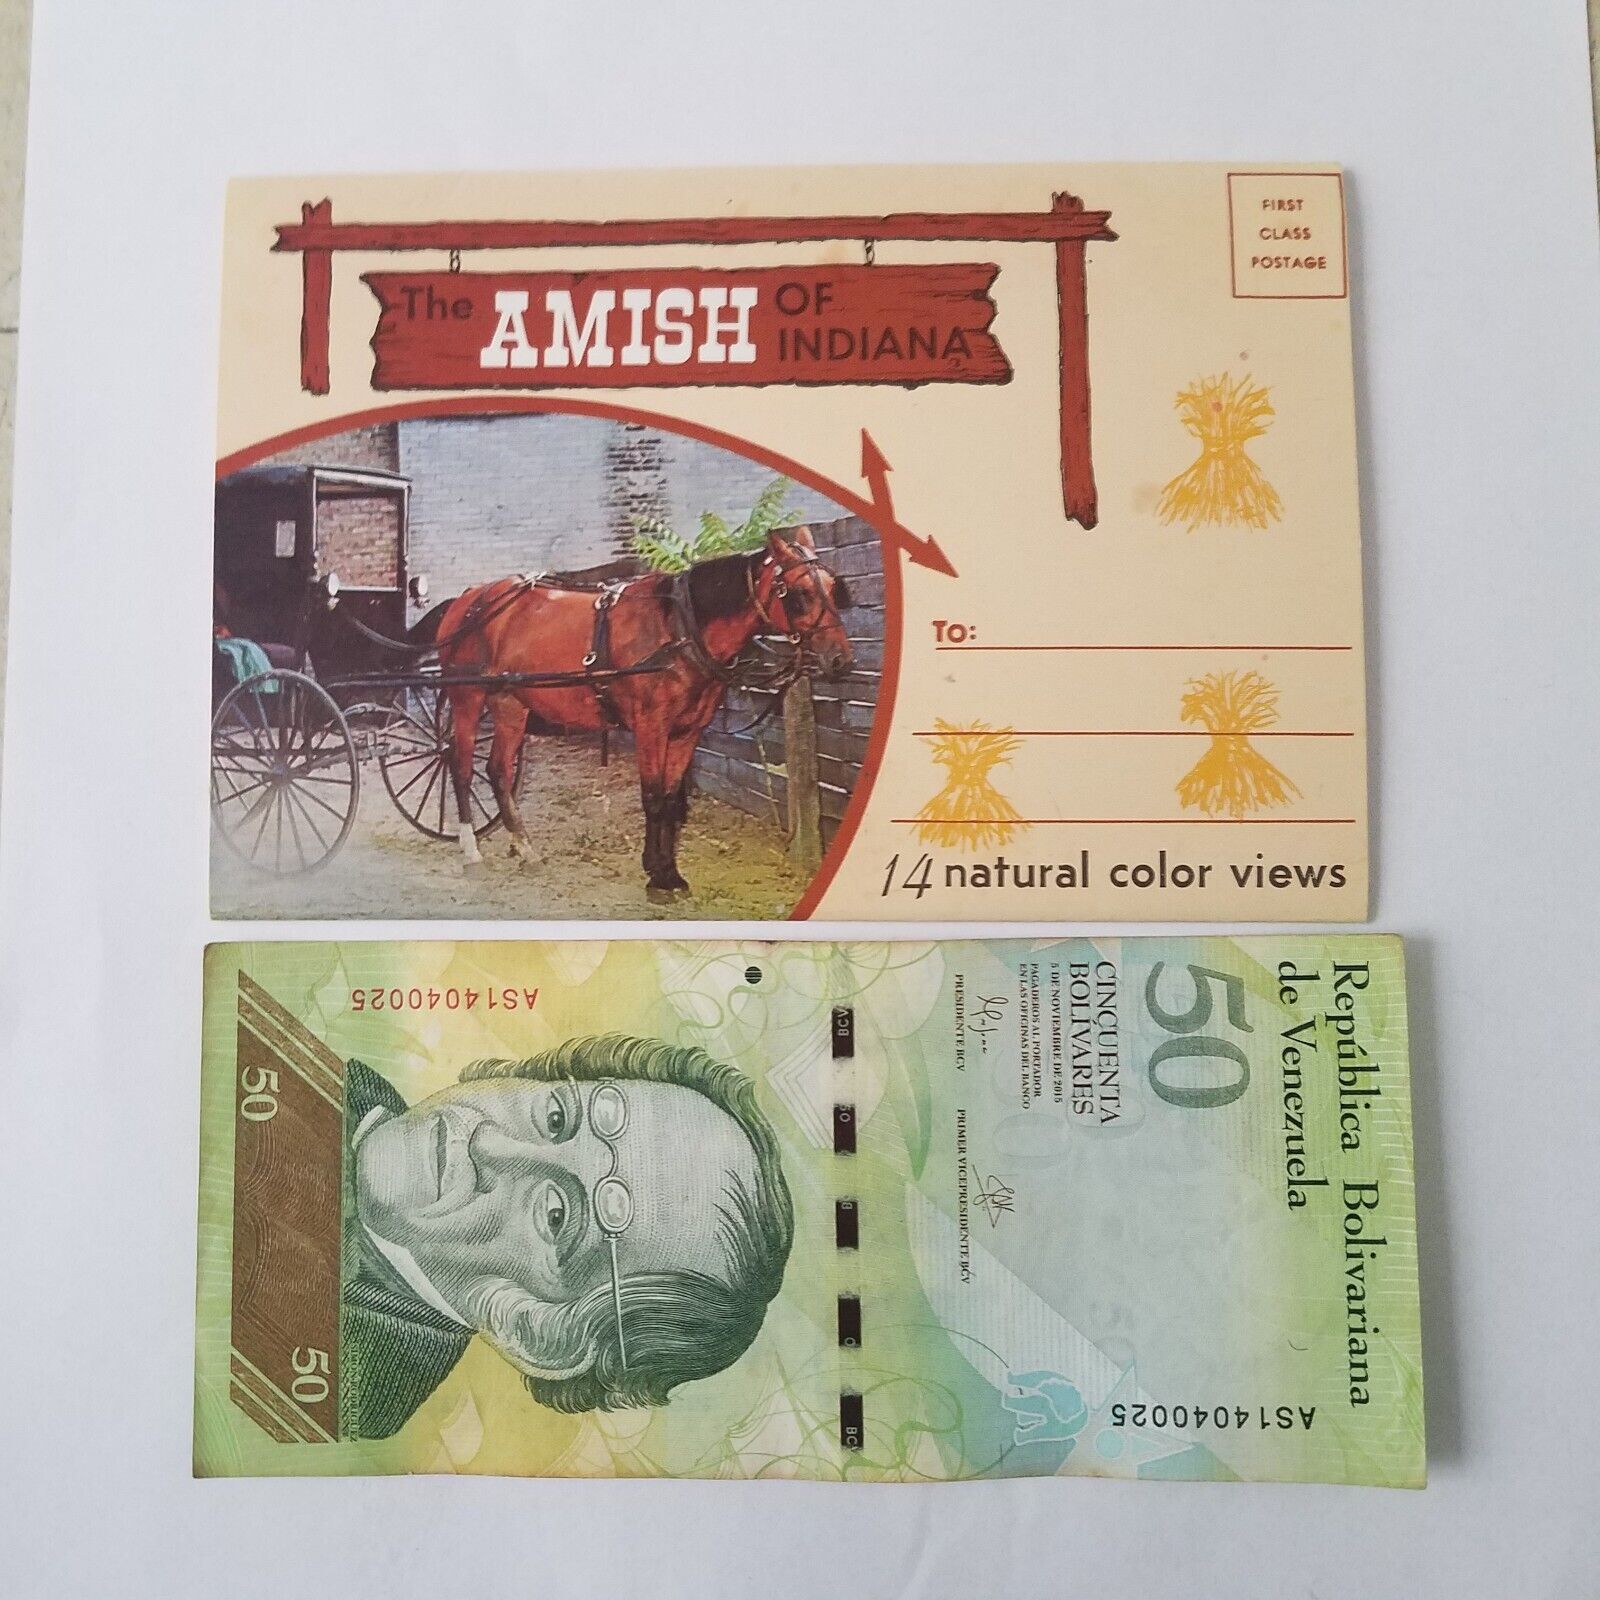 POSTCARD FOLDER-THE AMISH OF INDIANA free Foreign currency with purchase Tub15